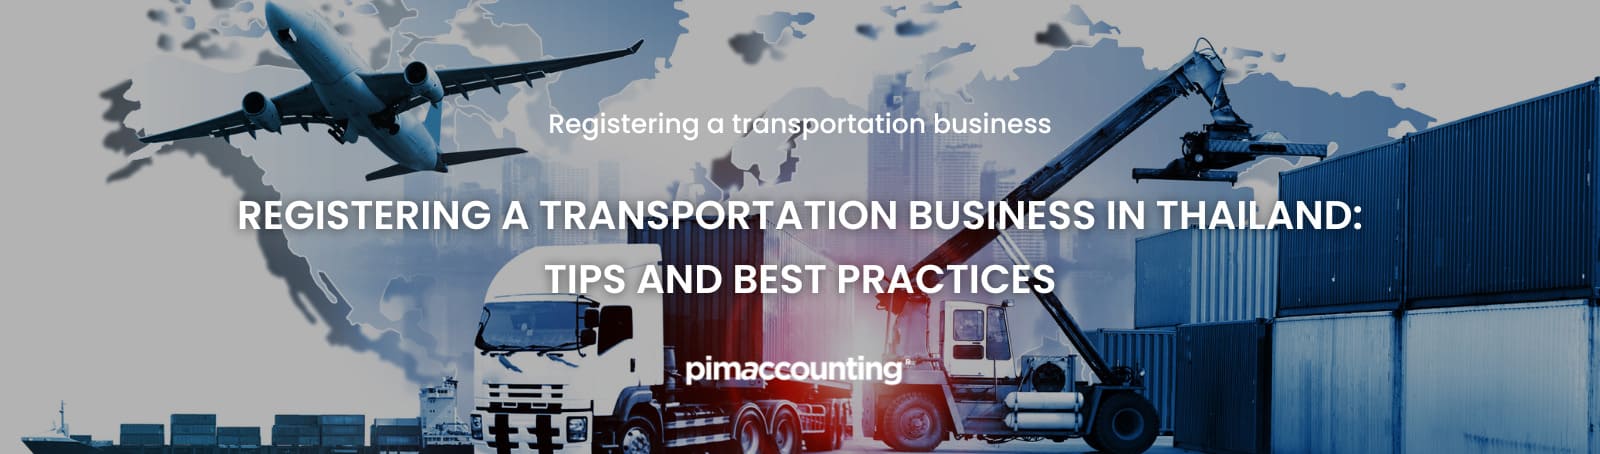 Registering a transportation business in Thailand: Tips and best practices - Pimaccounting